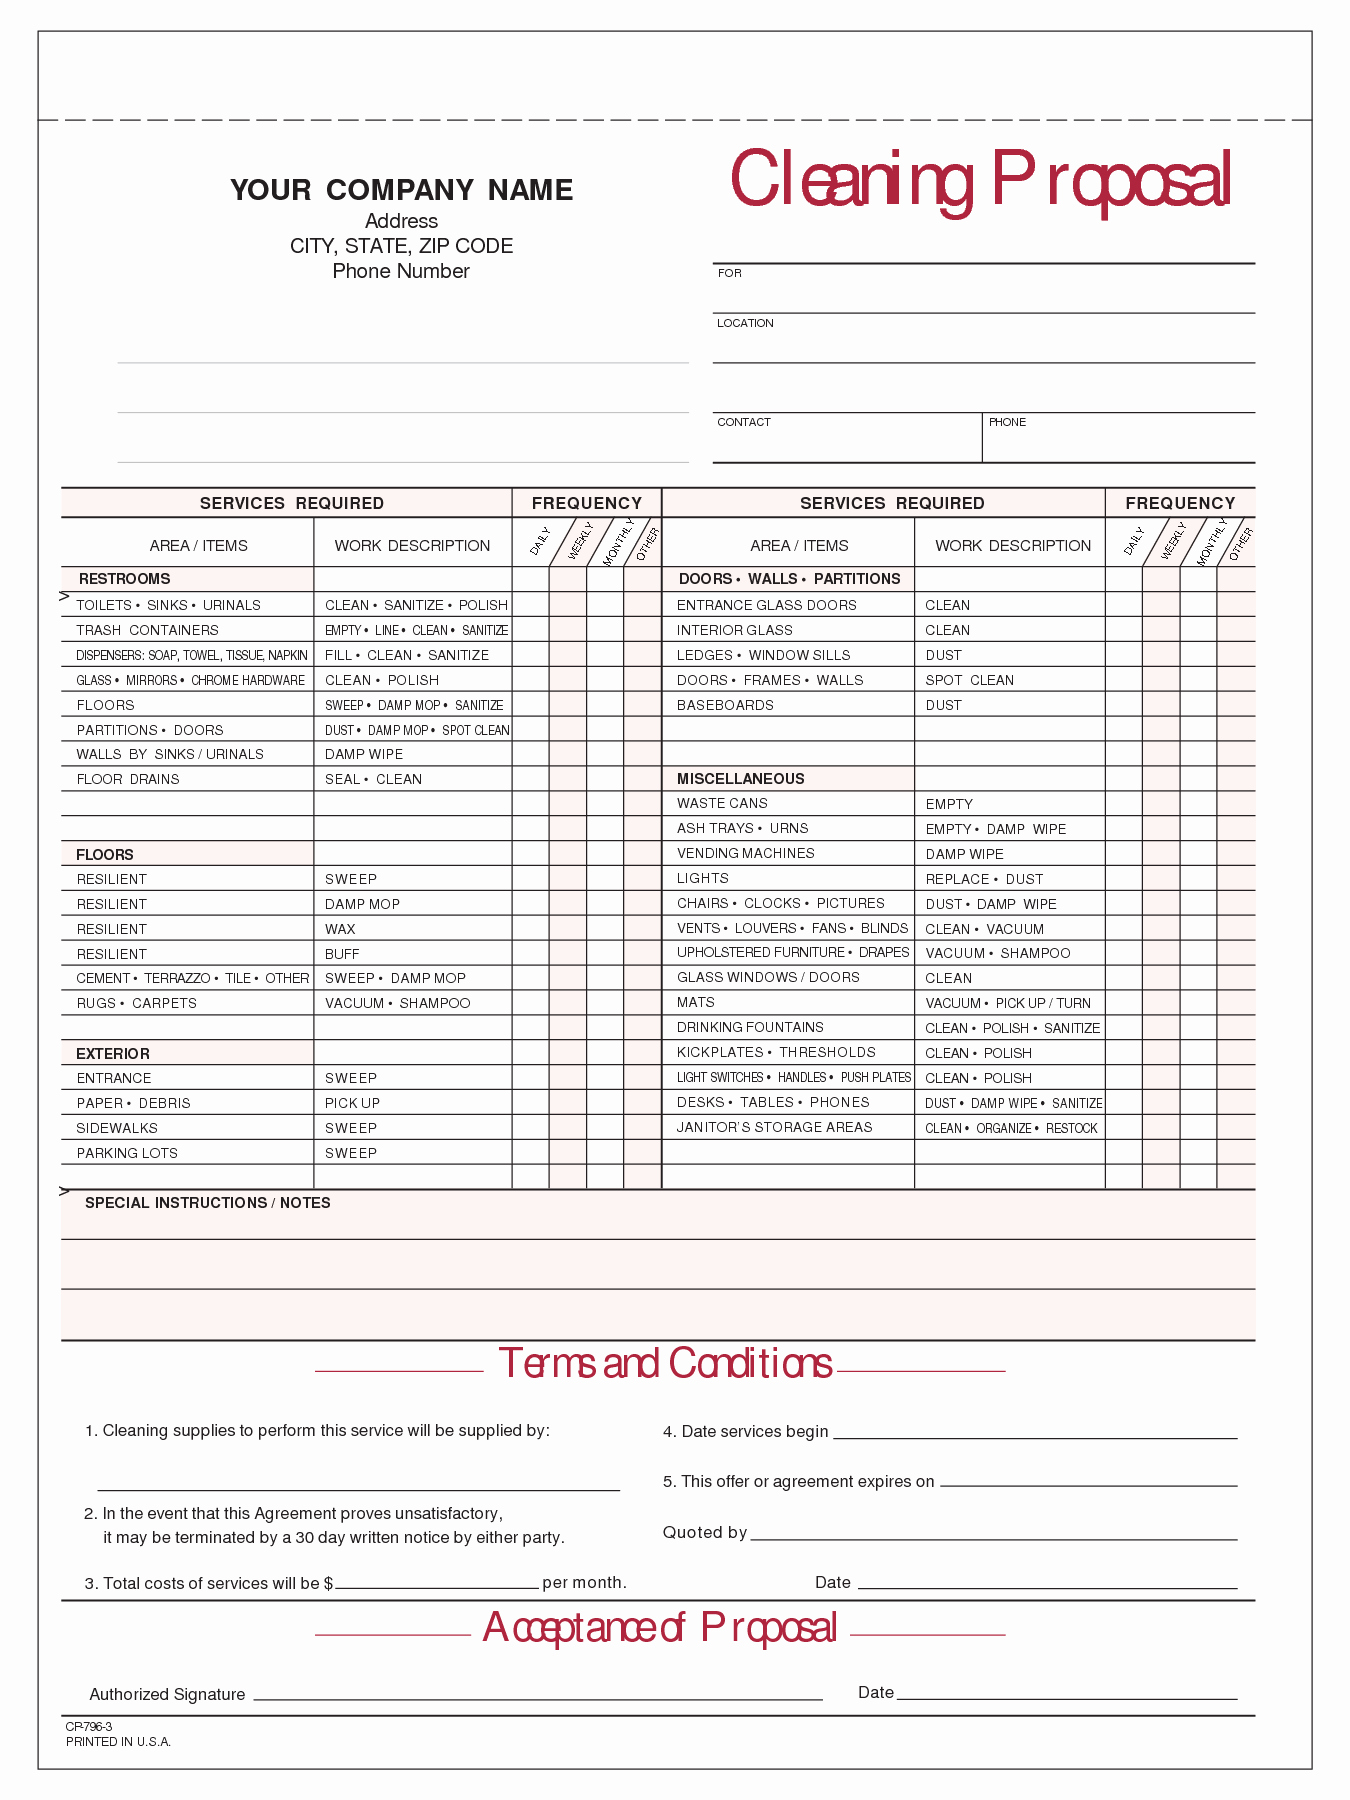 Janitorial Cleaning Proposal Templates